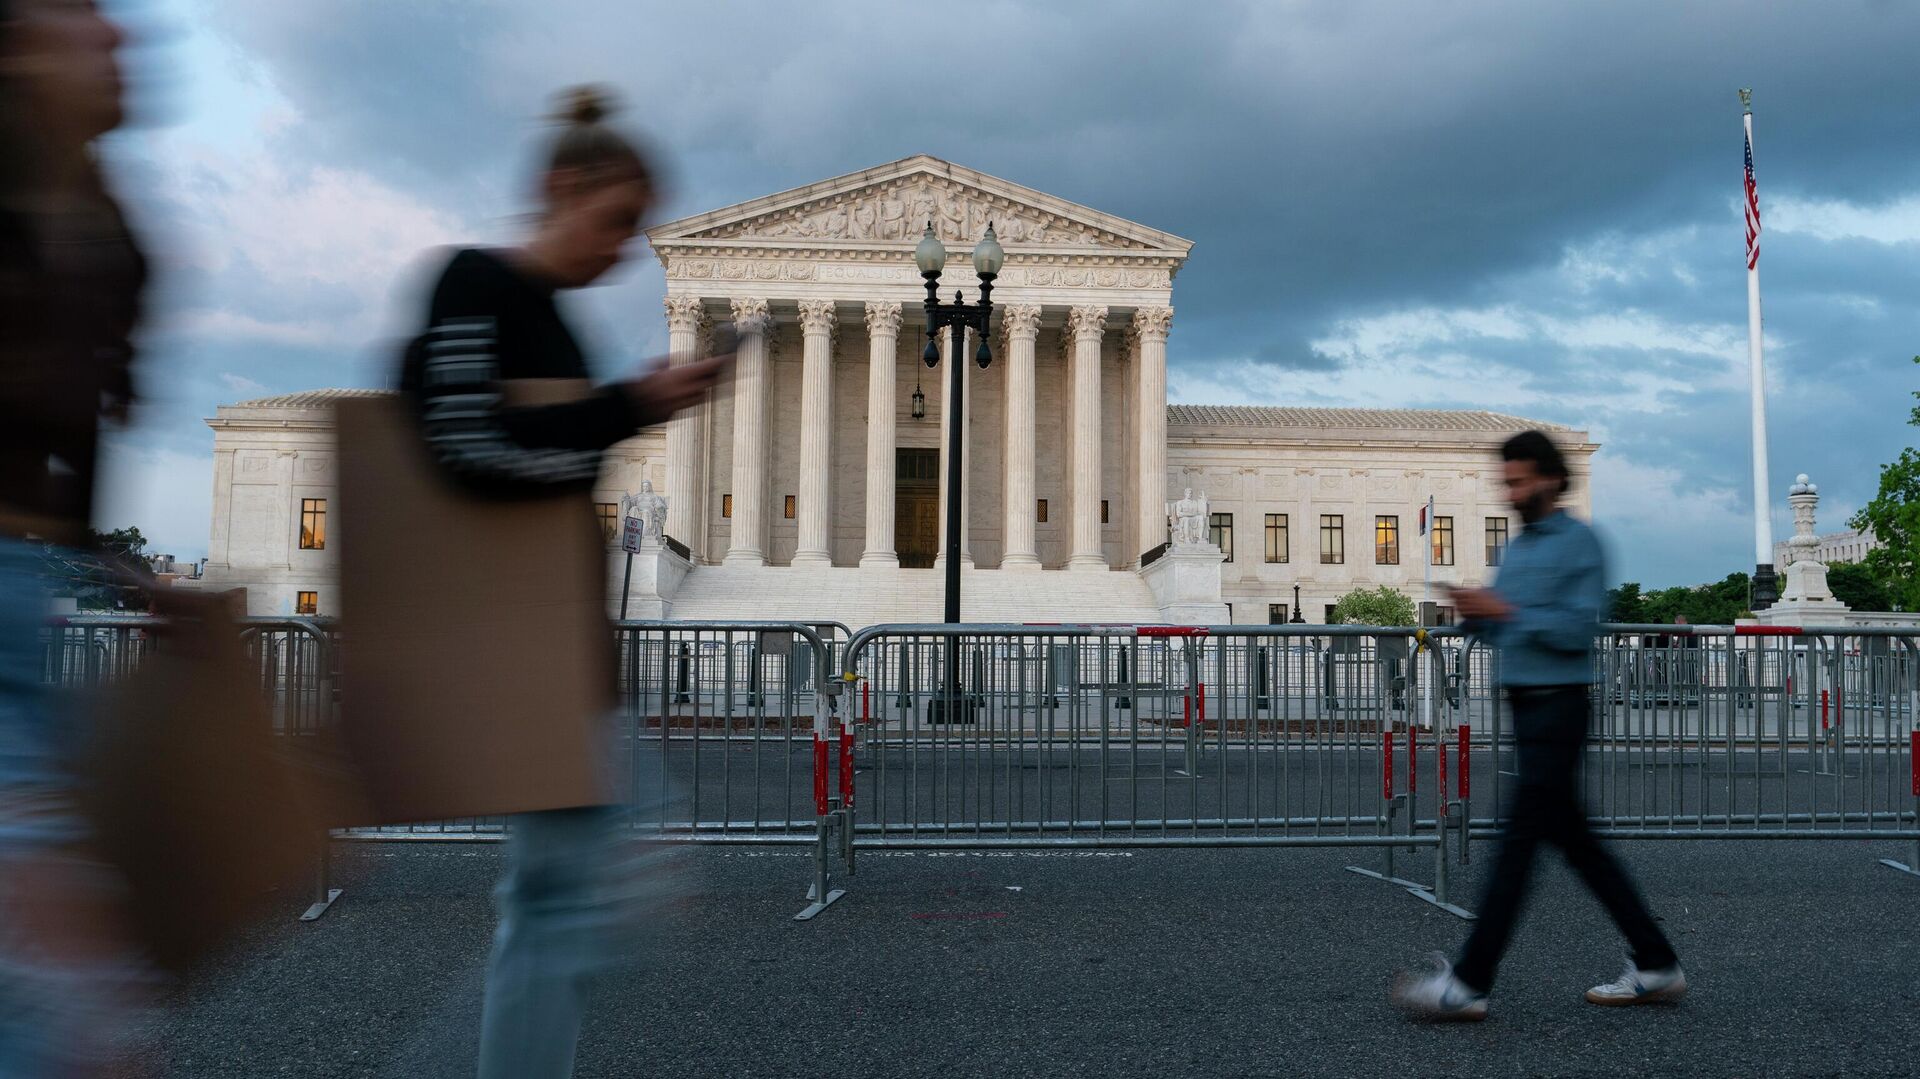 The U.S. Supreme Court building is shown as people walk past, Wednesday, May 4, 2022 in Washington. A draft opinion suggests the U.S. Supreme Court could be poised to overturn the landmark 1973 Roe v. Wade case that legalized abortion nationwide, according to a Politico report released Monday - Sputnik International, 1920, 23.06.2022